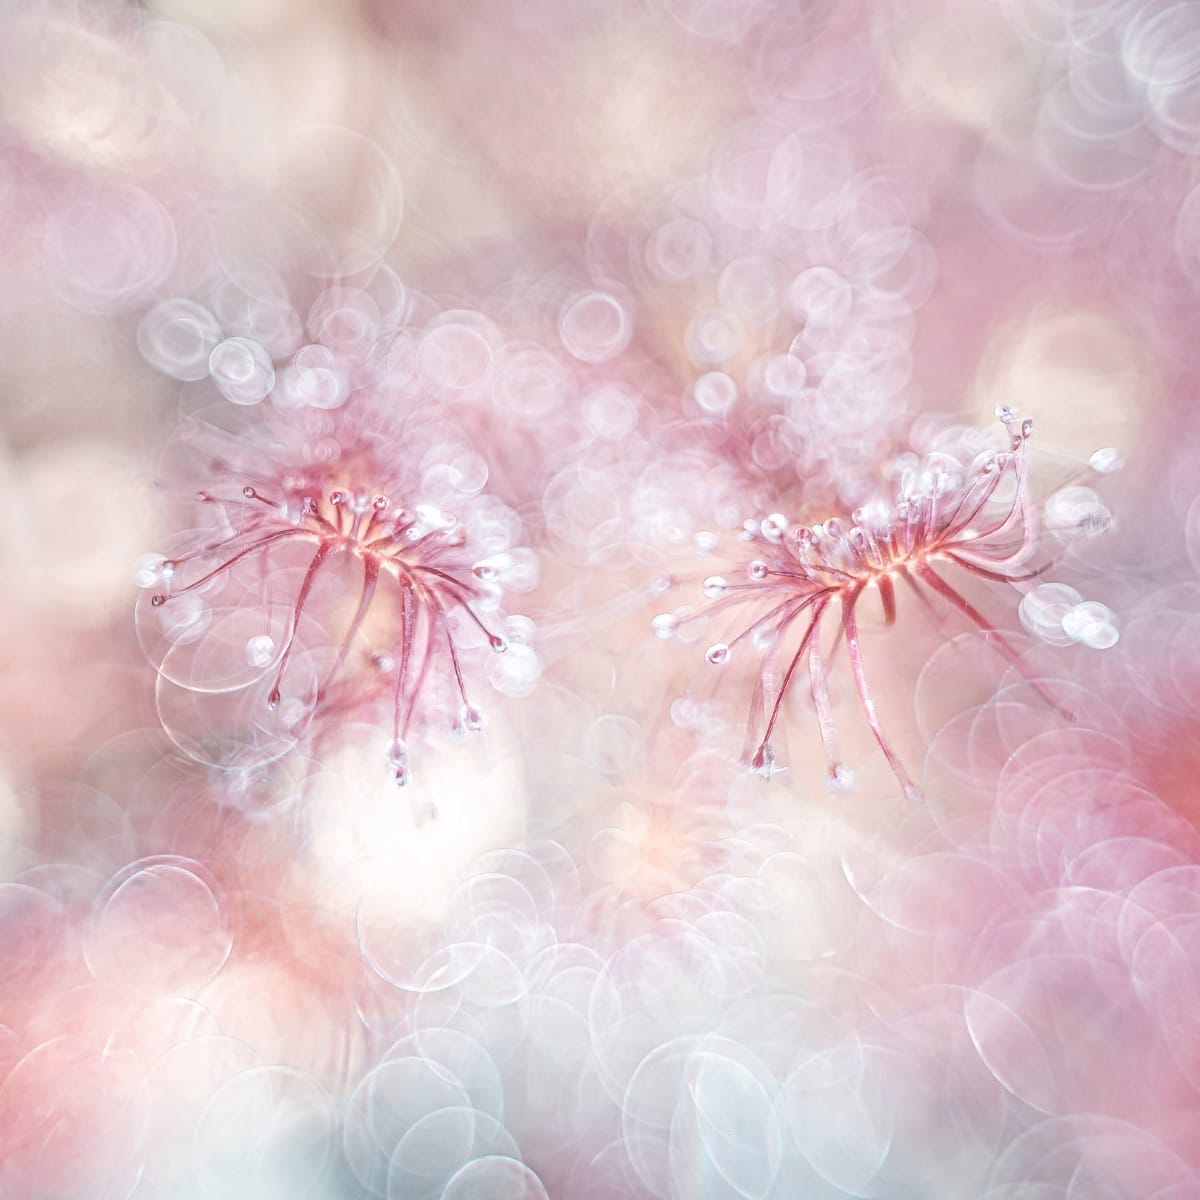 A sundew carnivorous plant becomes a pair of alluring eyelashes when photographed with a vintage lens.